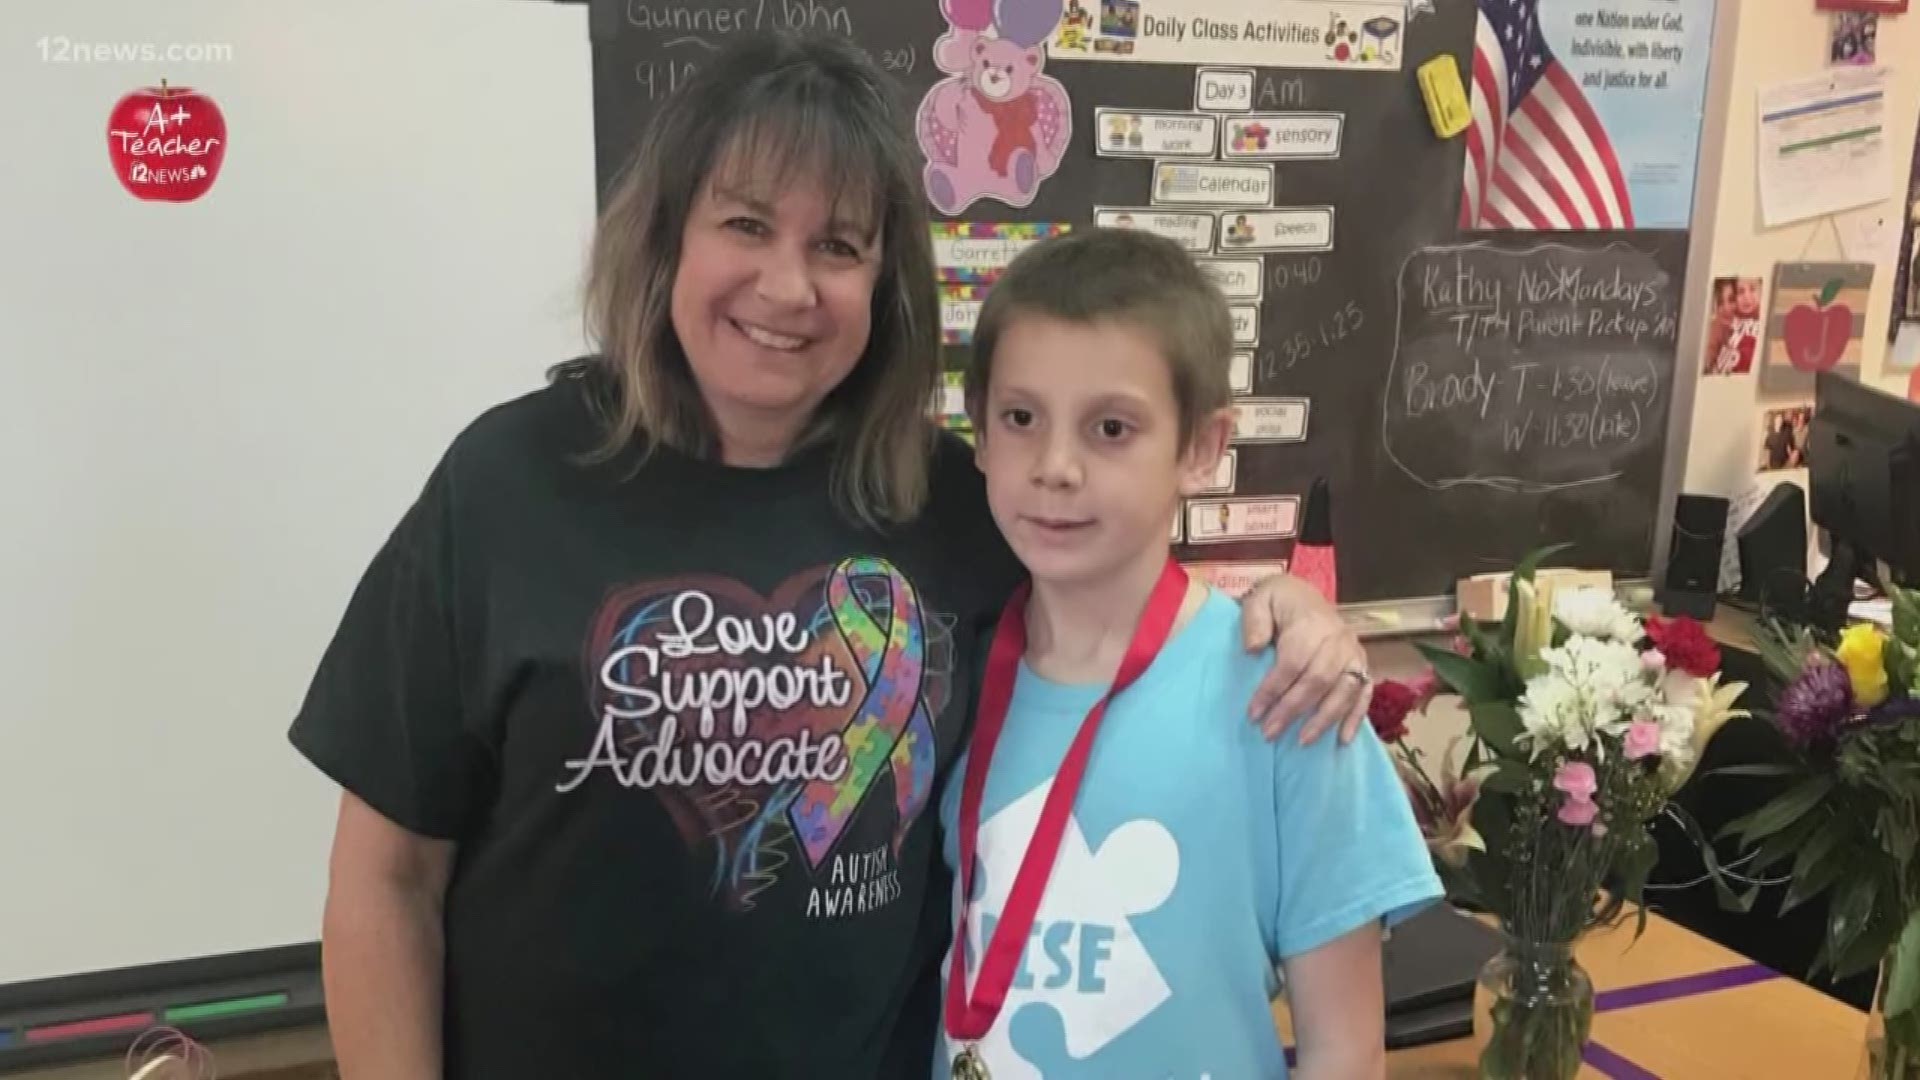 She's not your typical teacher. She goes above and beyond to make sure her kindergartners living with autism know she cares about them and have a happy environment to learn in.